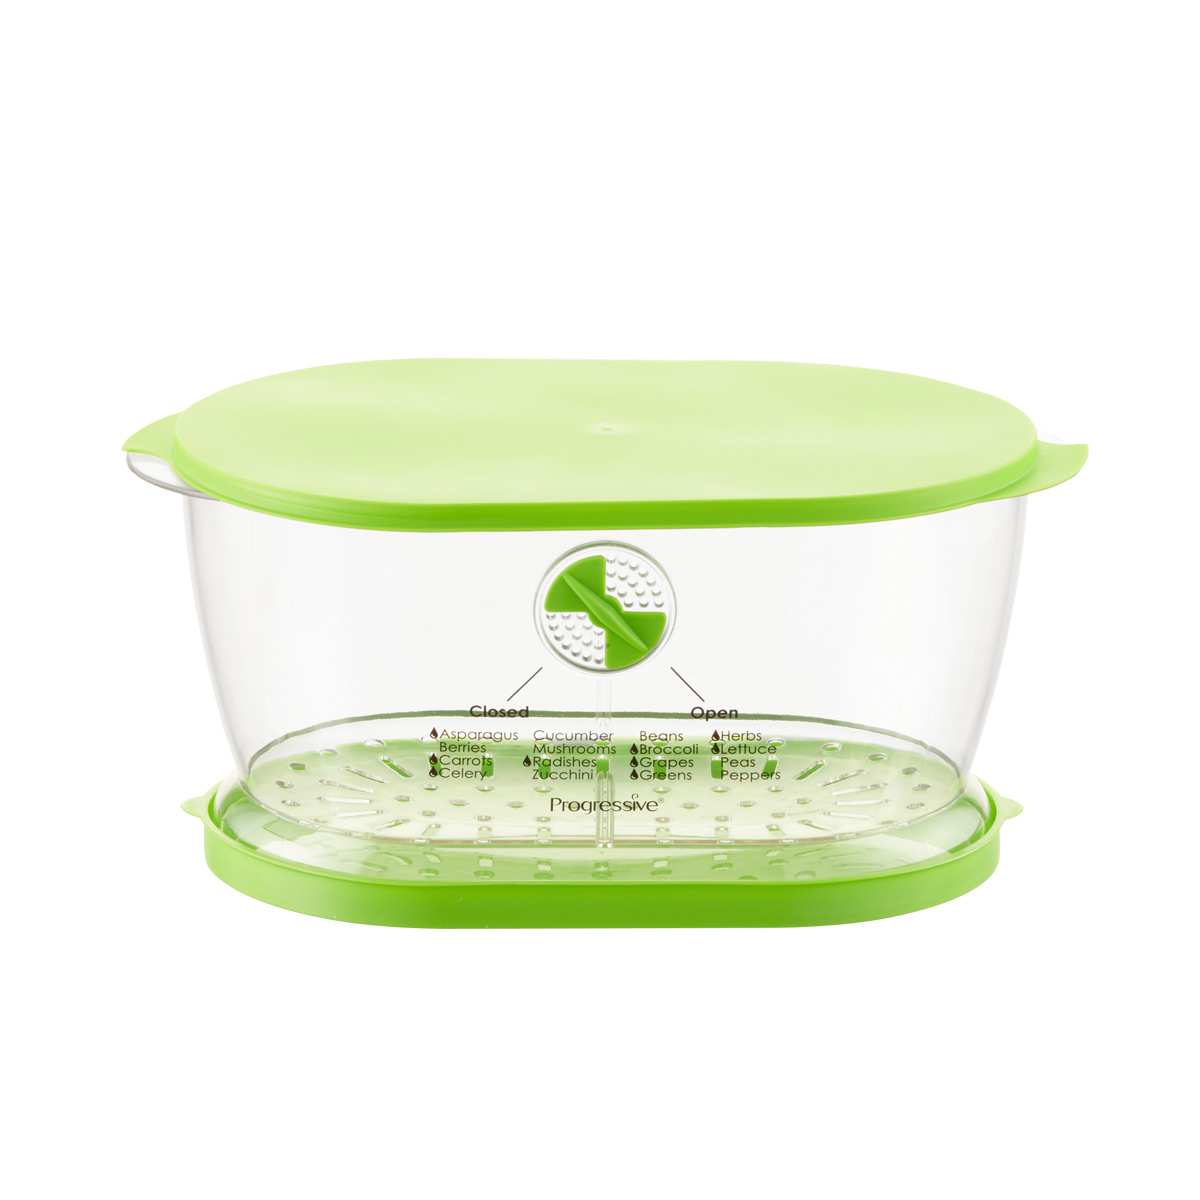 https://www.containerstore.com/catalogimages/314752/10042017-lettuce-keeper-v2.jpg